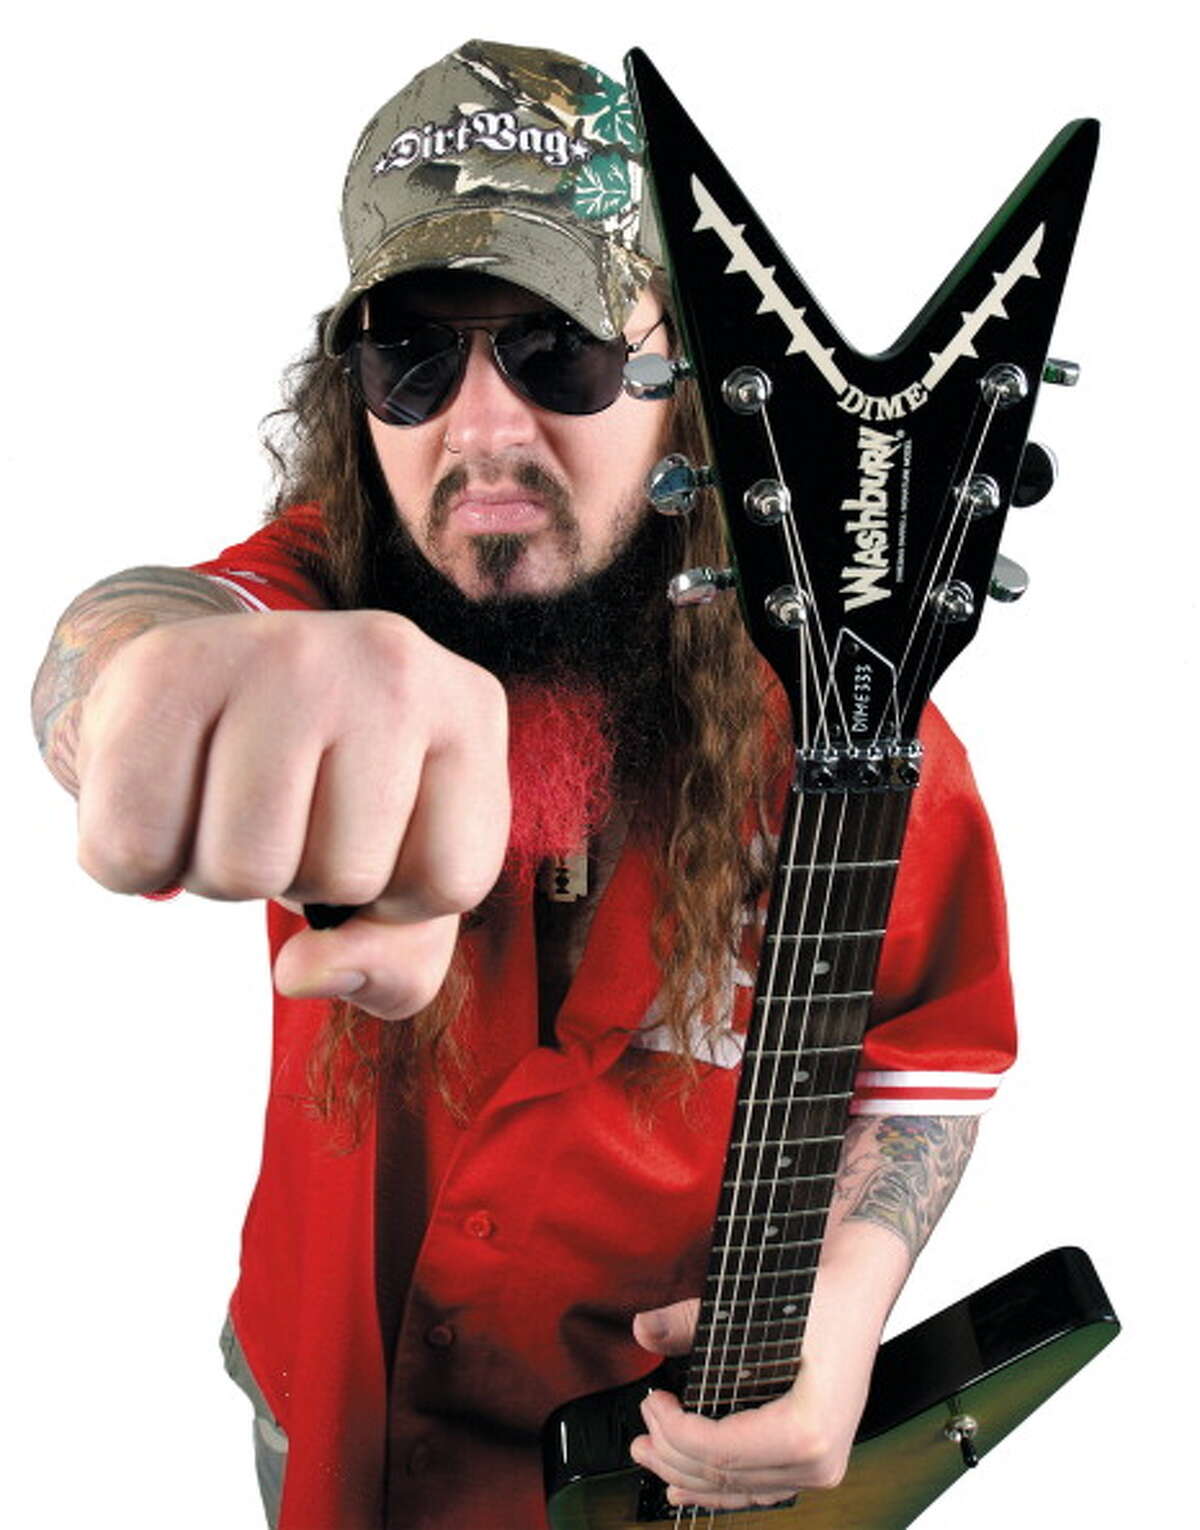 Dimebag Darrell Abbott The influential metal guitarist, who was shot and killed onstage in 2004, is buried at the Moore Memorial Gardens Cemetery in Arlington. 